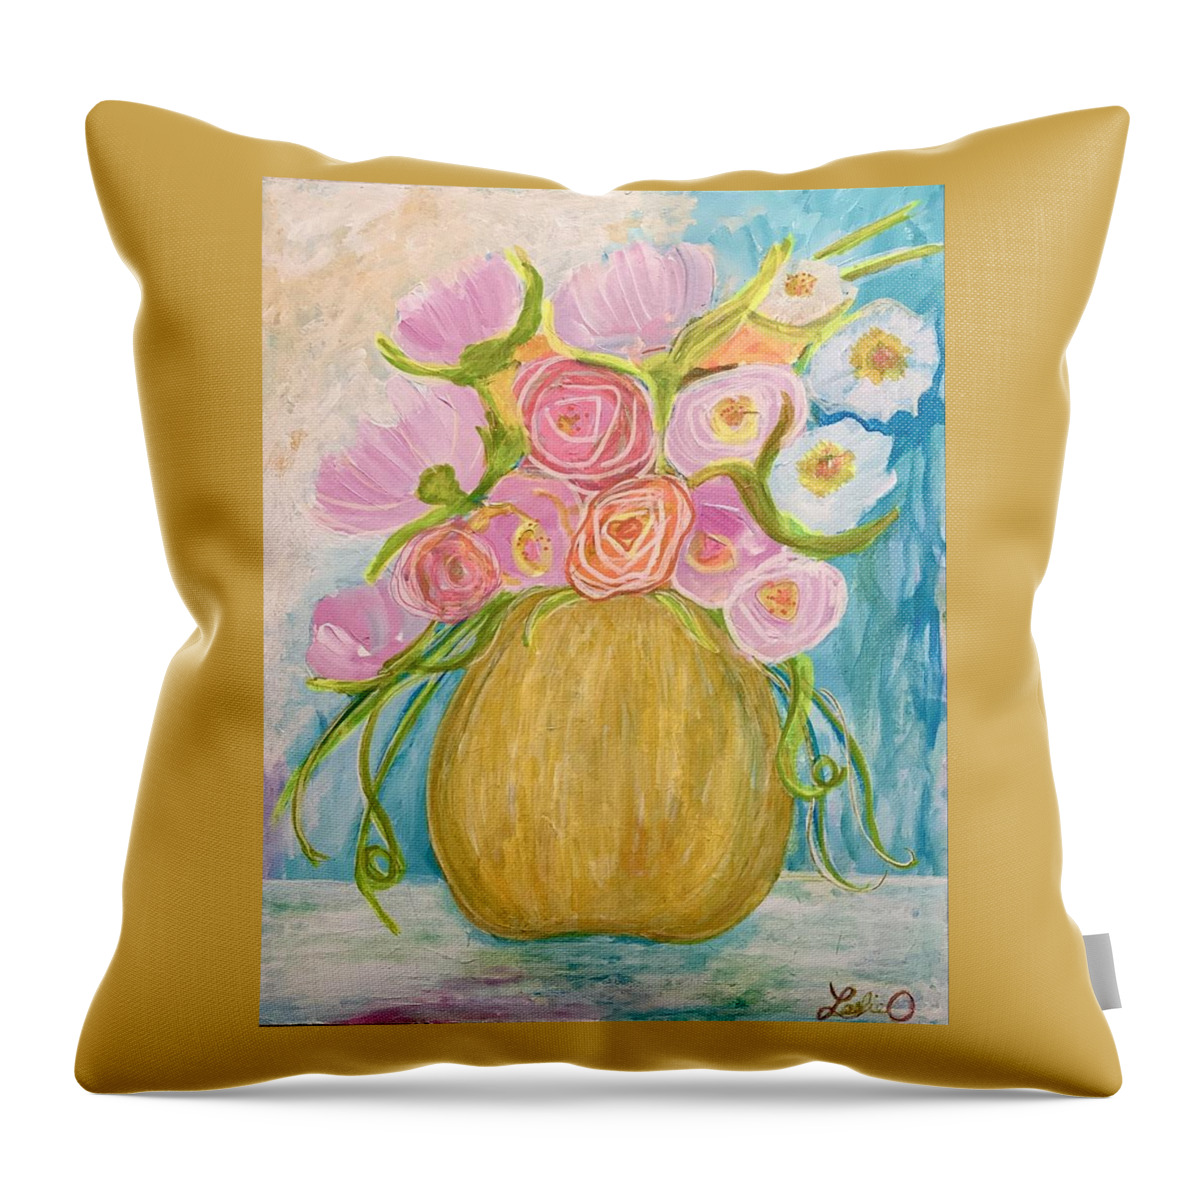 Morning Throw Pillow featuring the painting Morning Flowers by Coco Olson